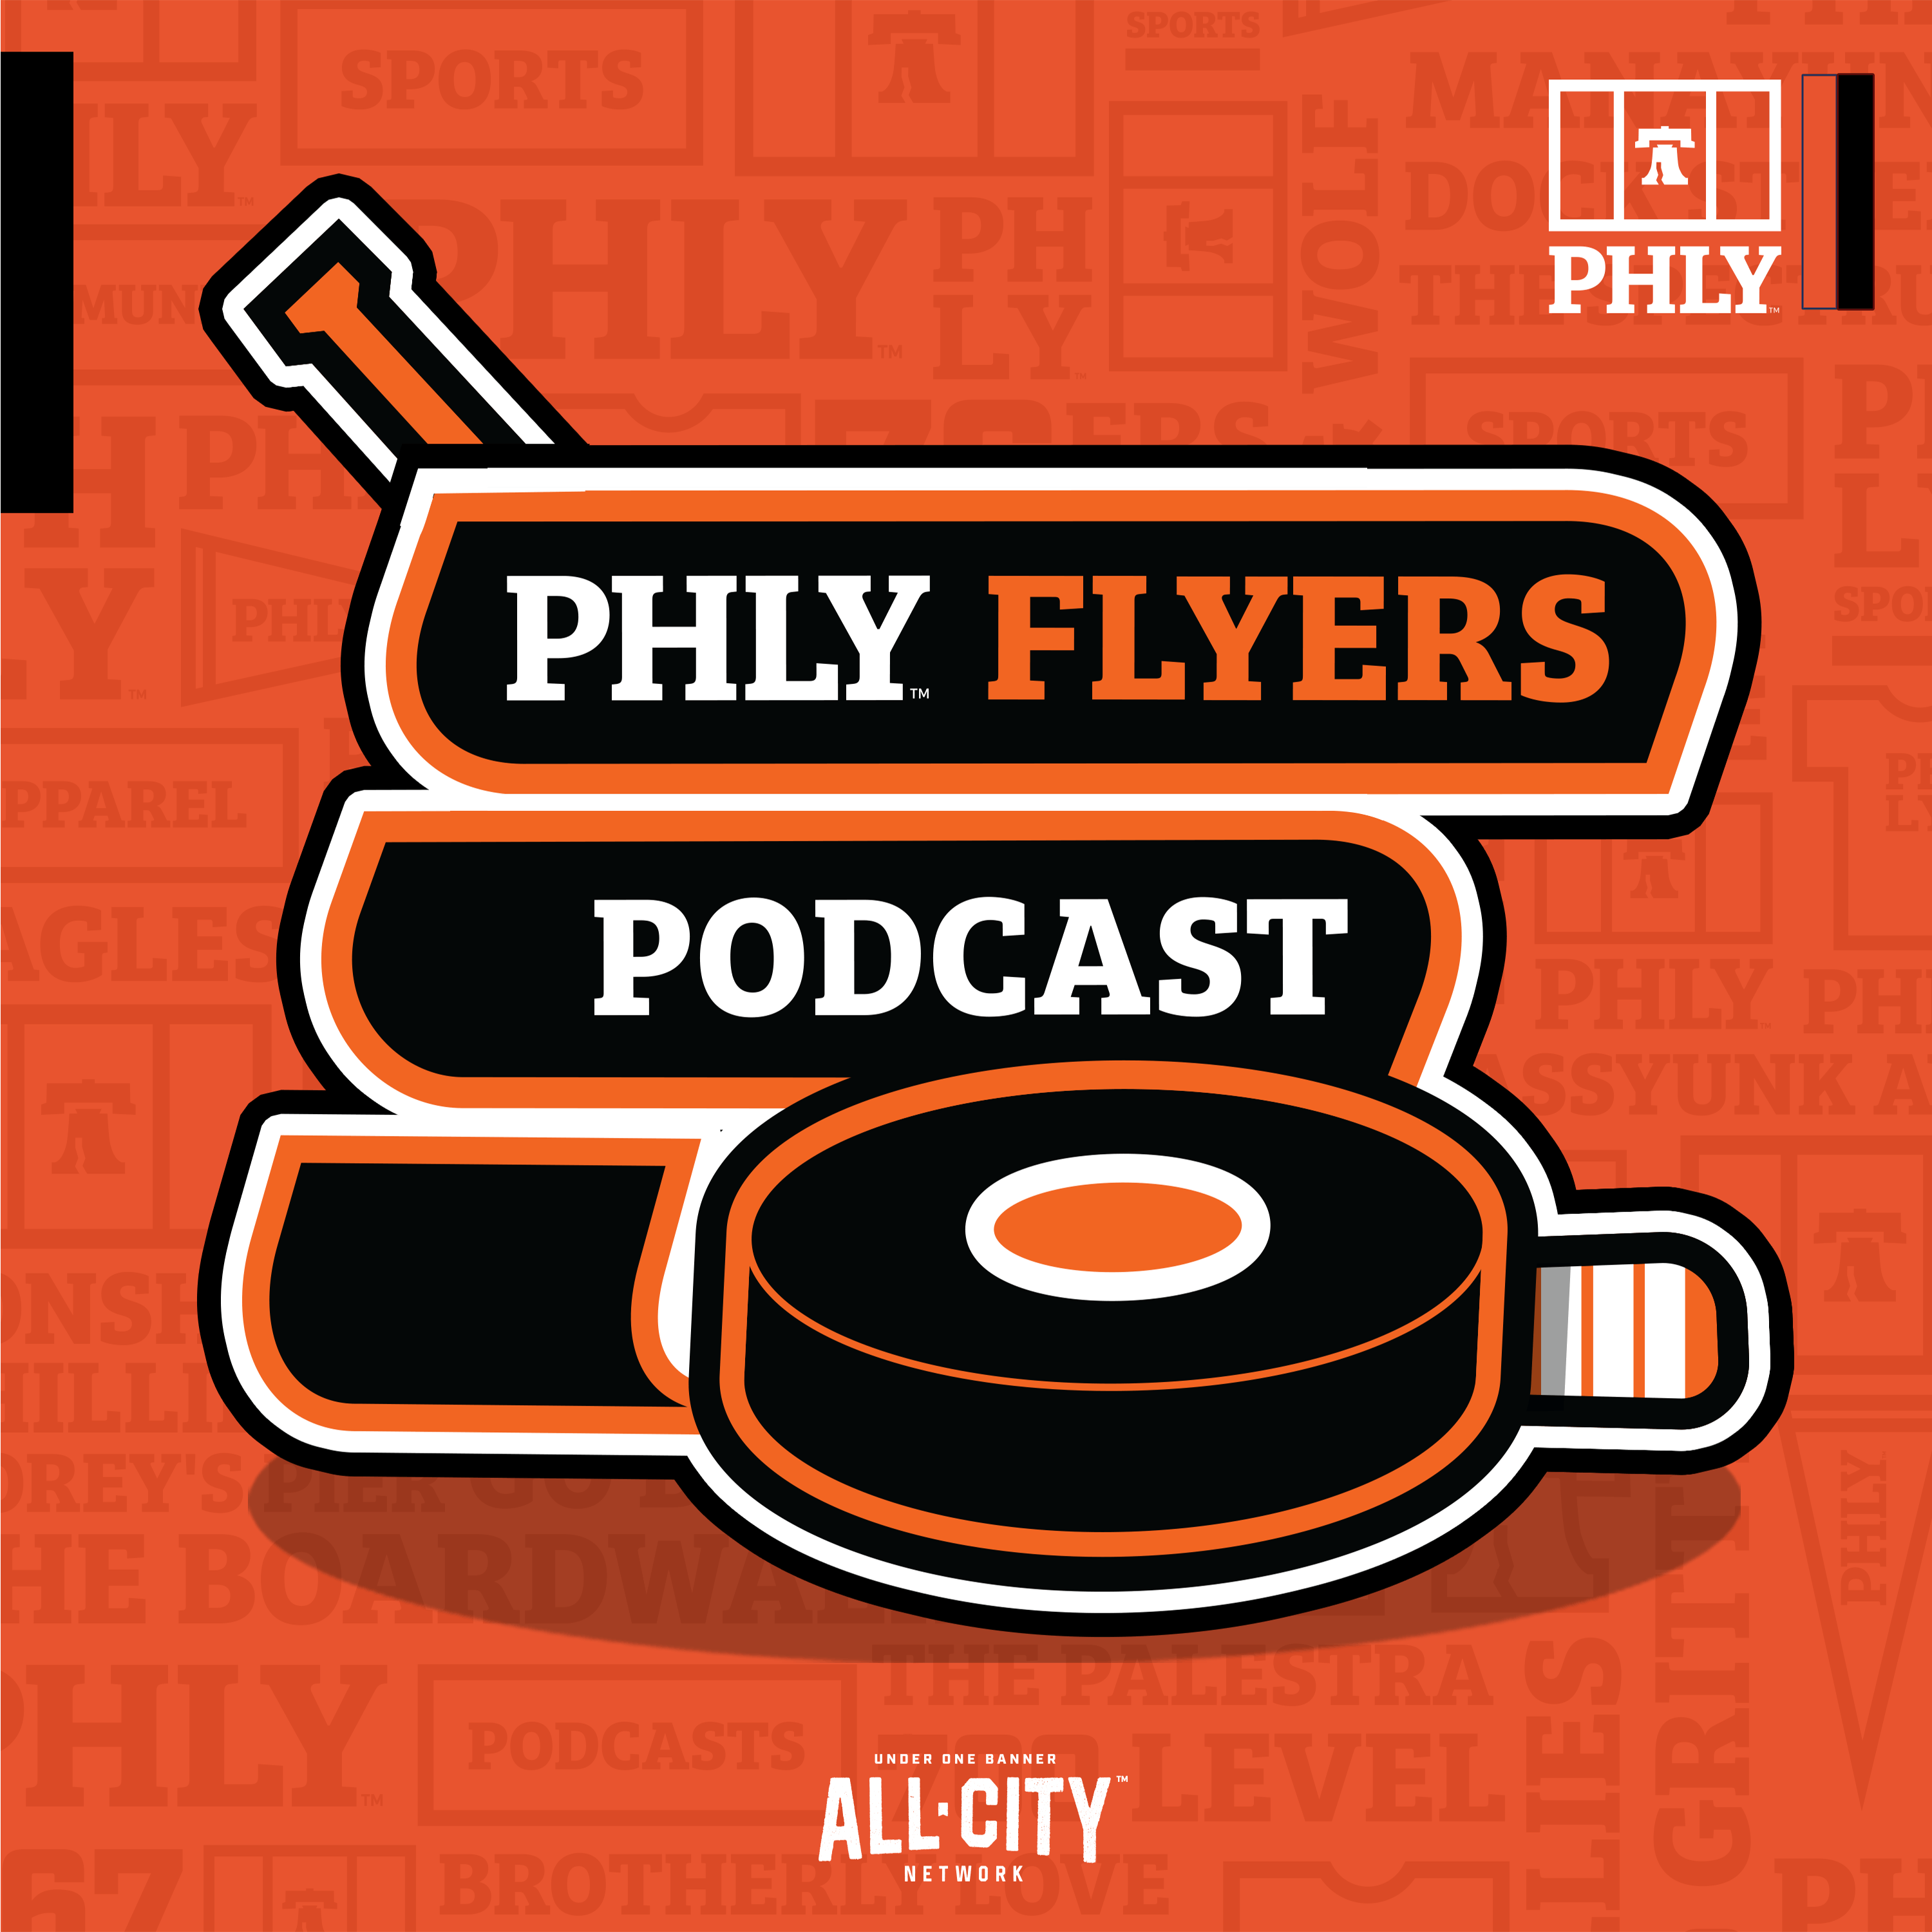 PHLY Flyers Podcast | Philadelphia Flyers NHL Draft Preview: Macklin Celebrini, Berkly Catton and the Center Prospects